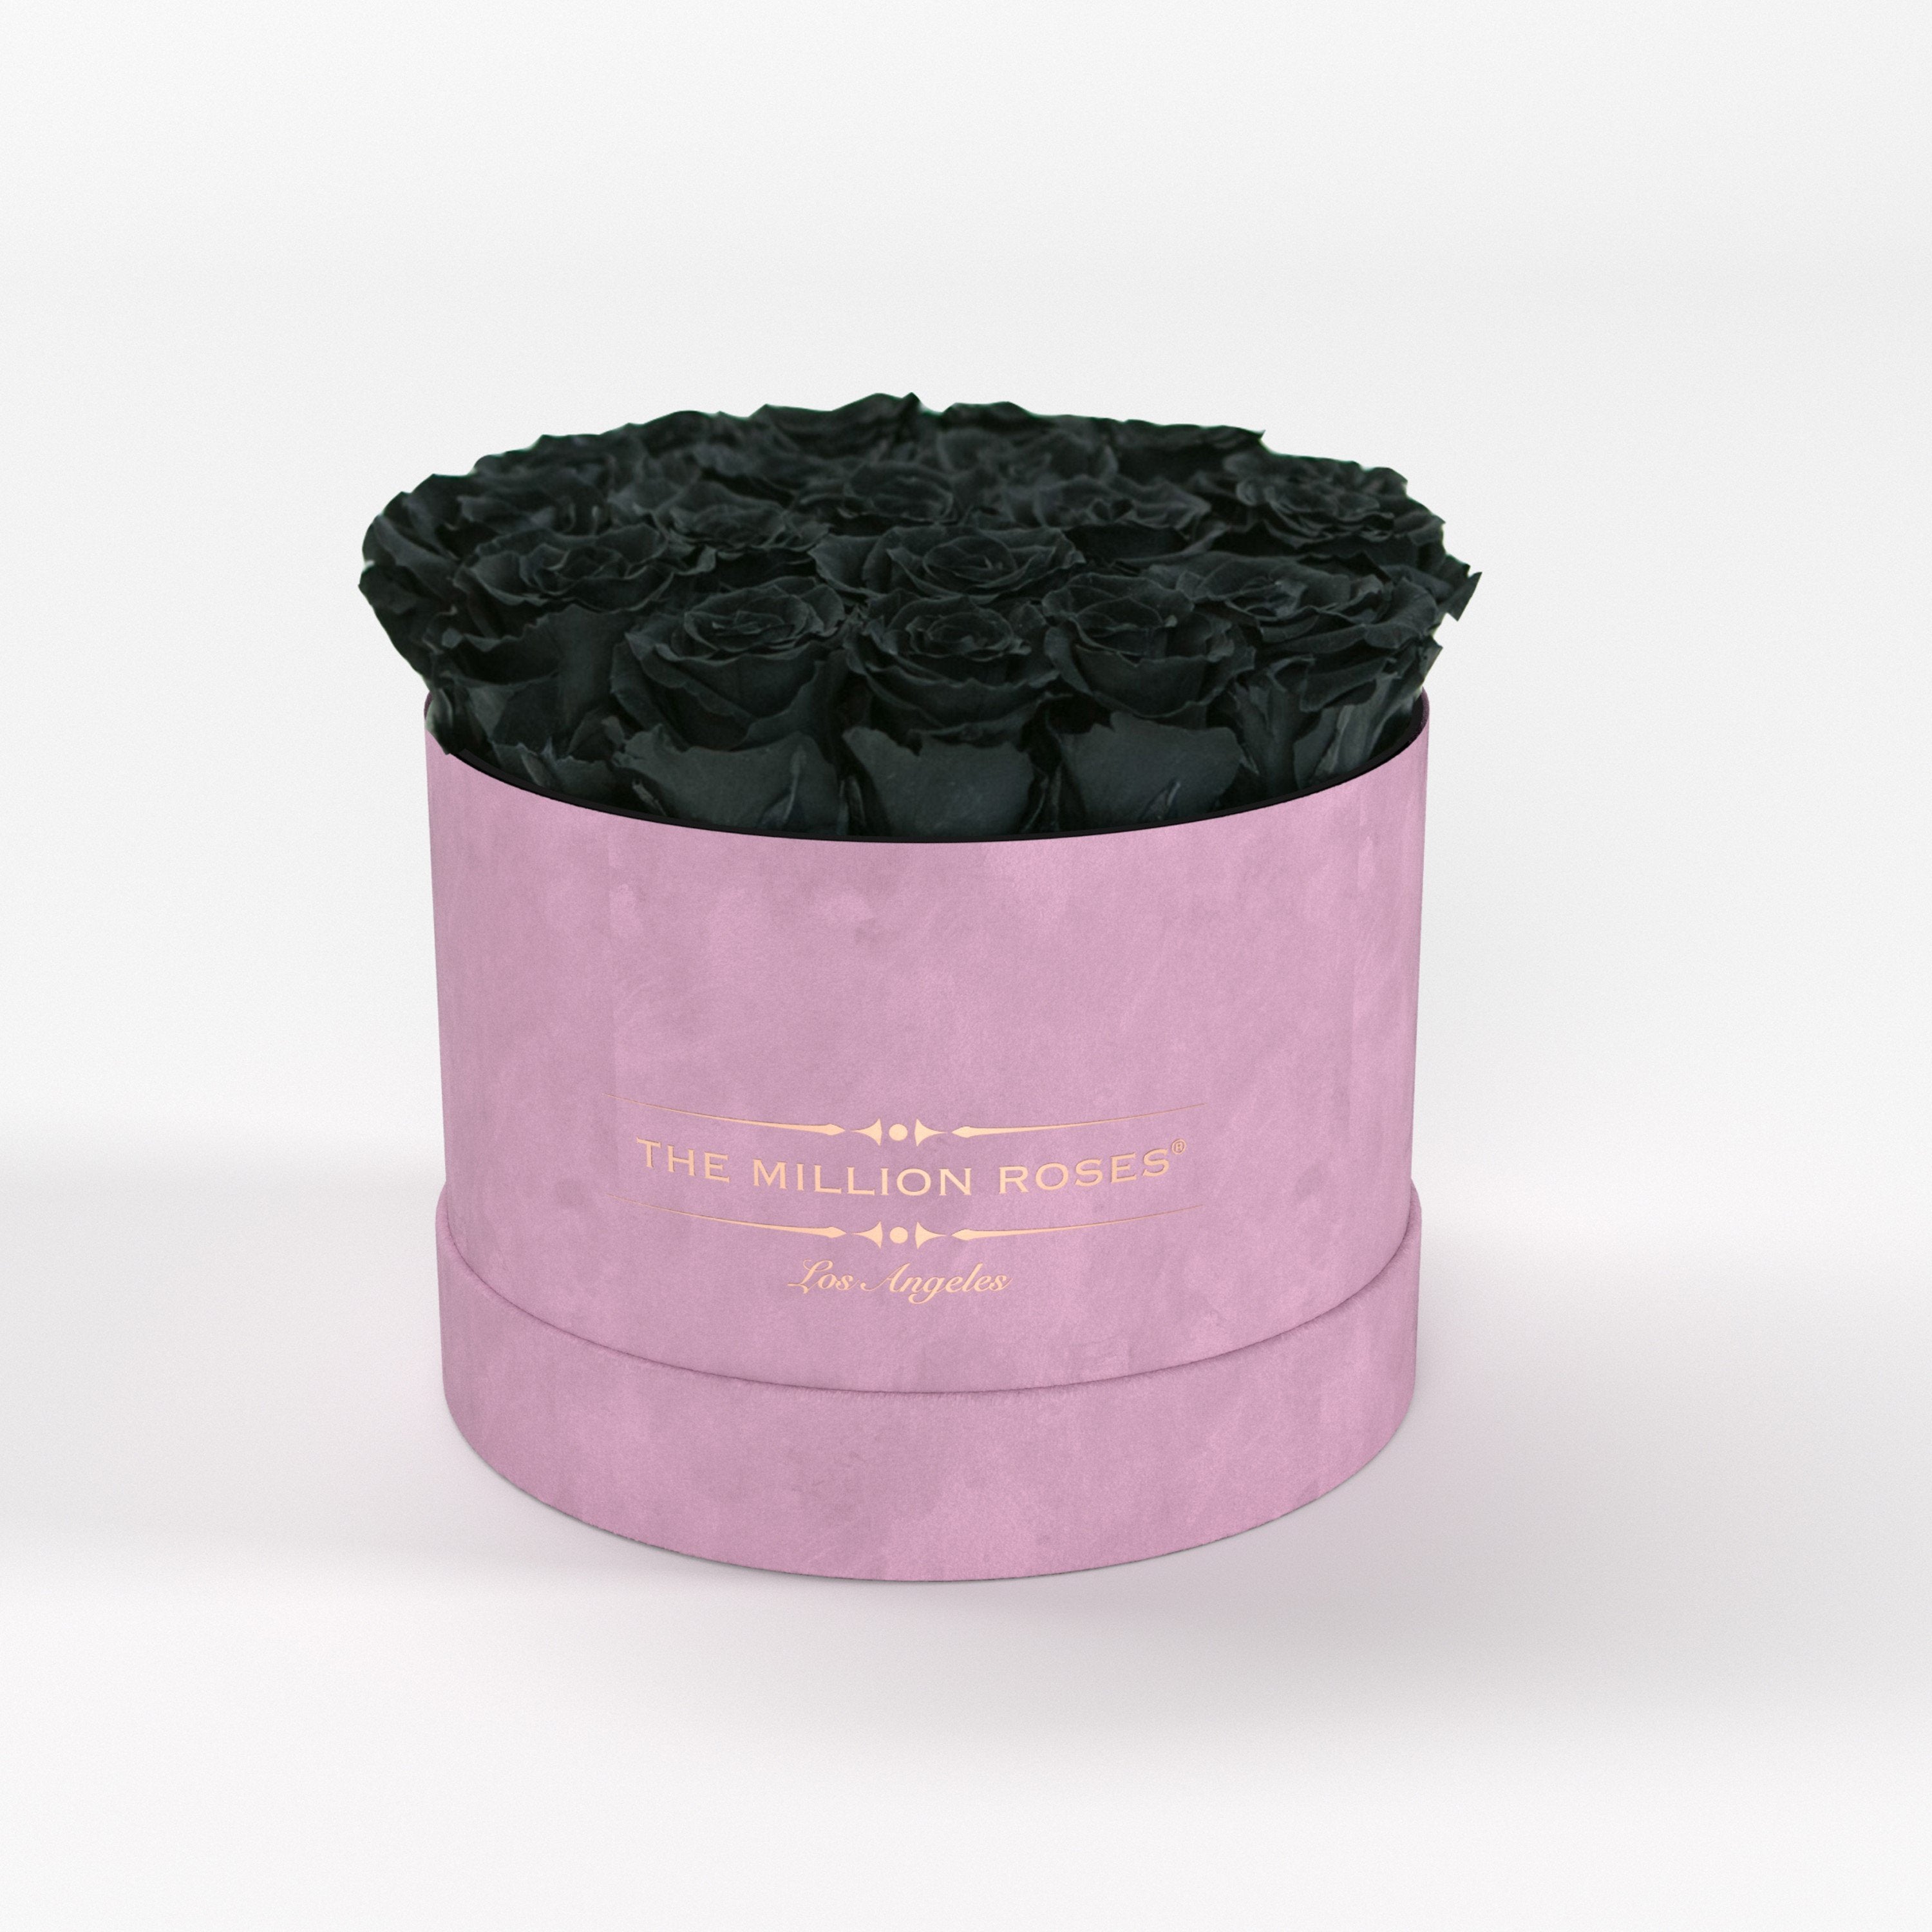 ( LA ) Light Pink - Suede - Classic Box with Black Roses Kit - the million roses